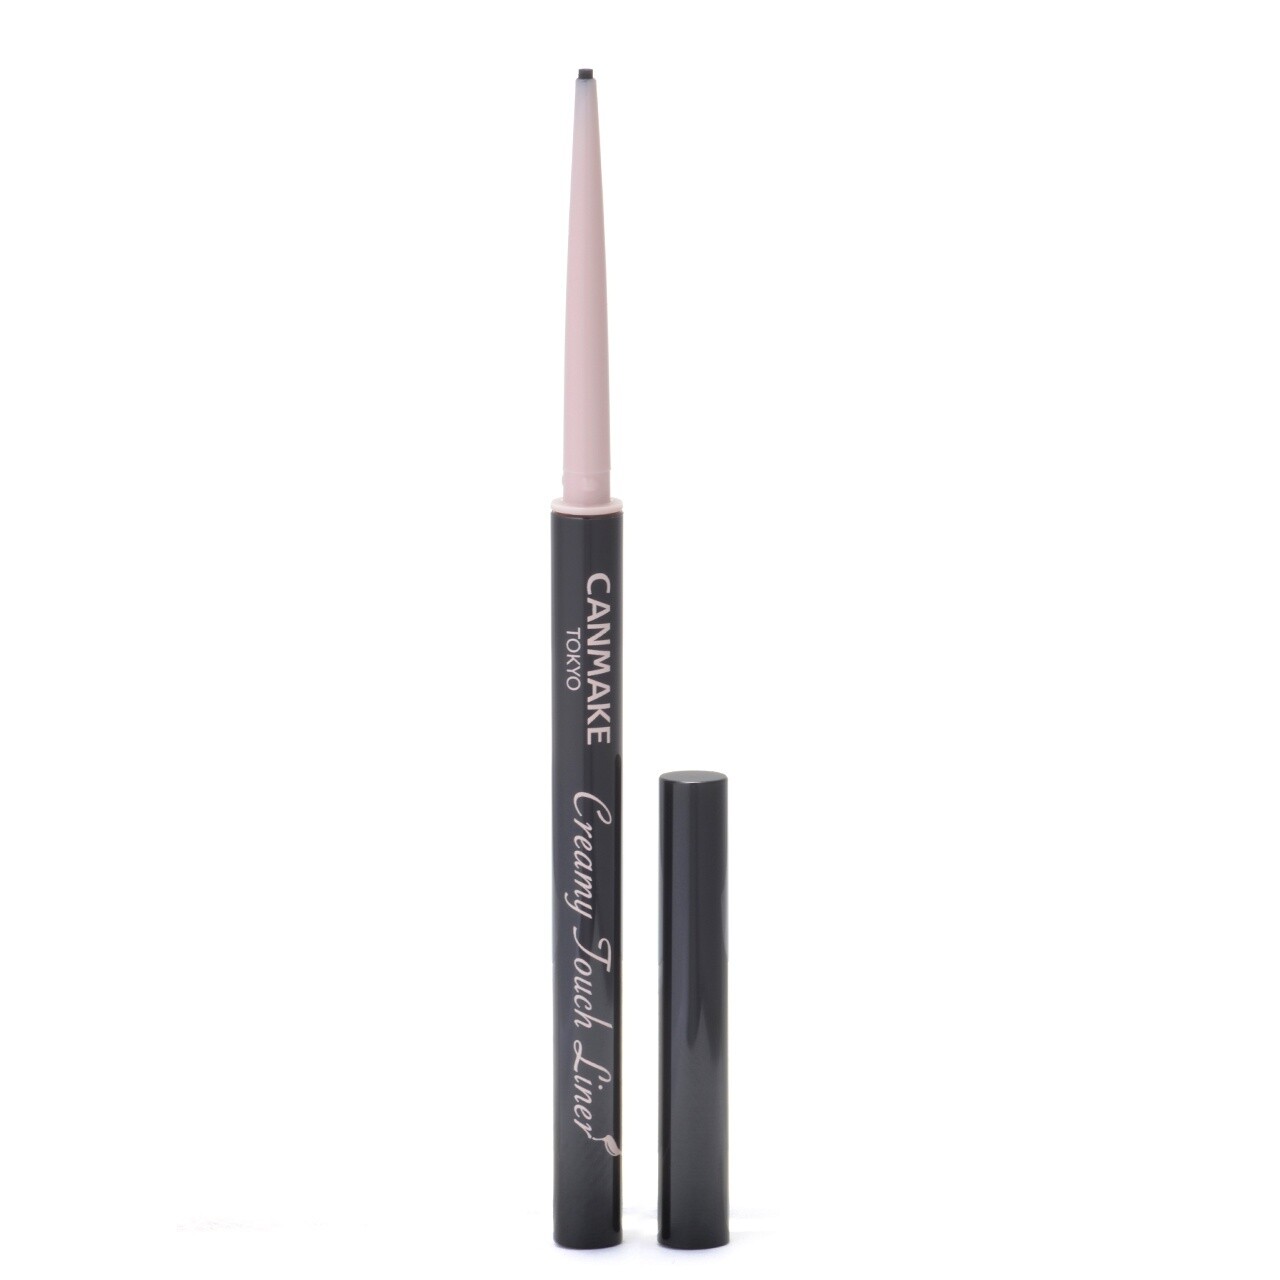 CANMAKE Creamy Touch Liner, Color: 01 Deep Black